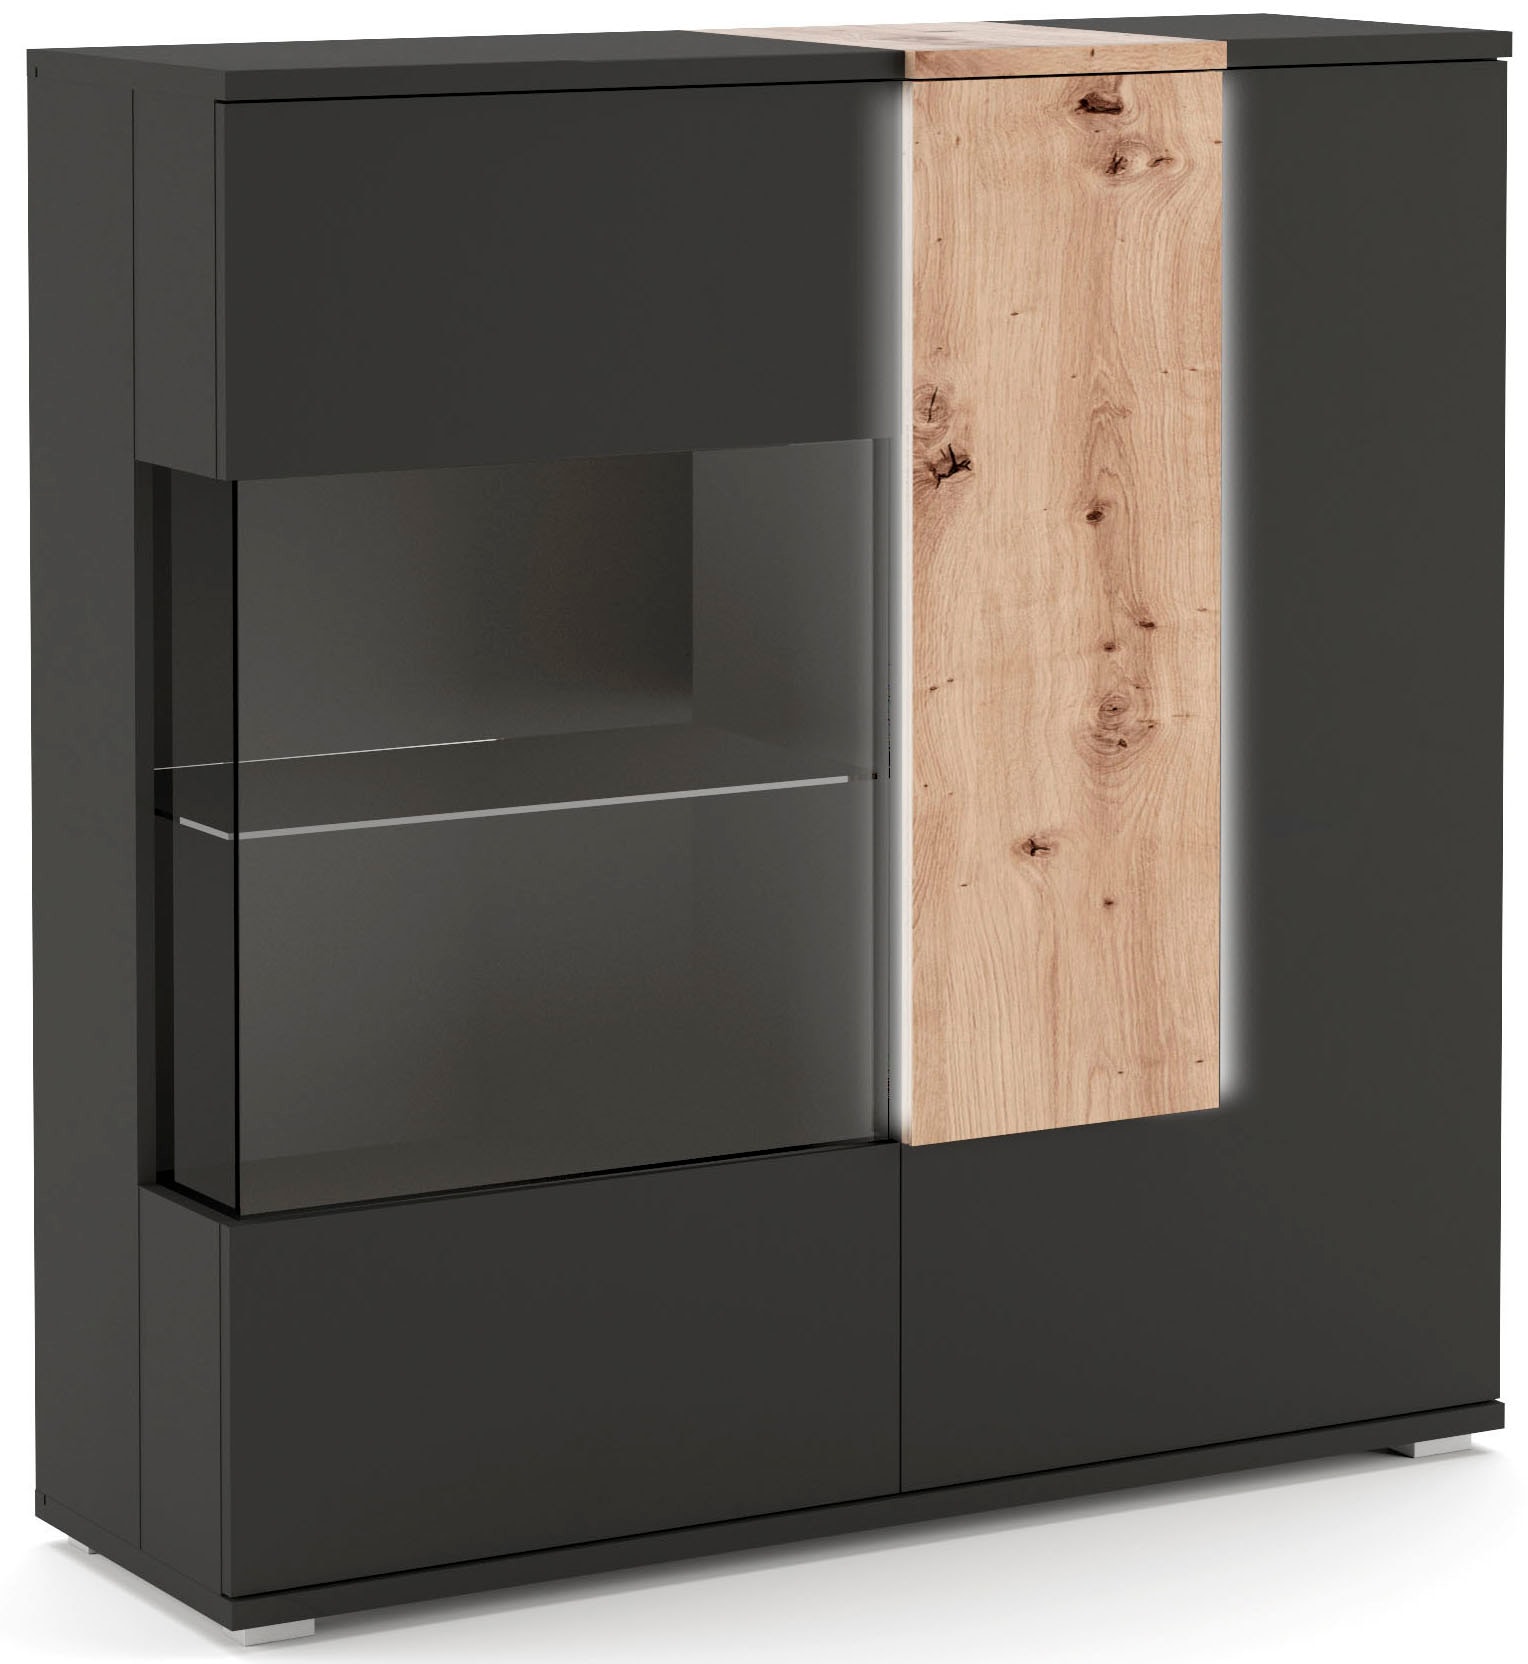 COTTA Highboard »Montana«, Breite 120 cm, inkl. LED-Beleuchtung und Push-To-Open